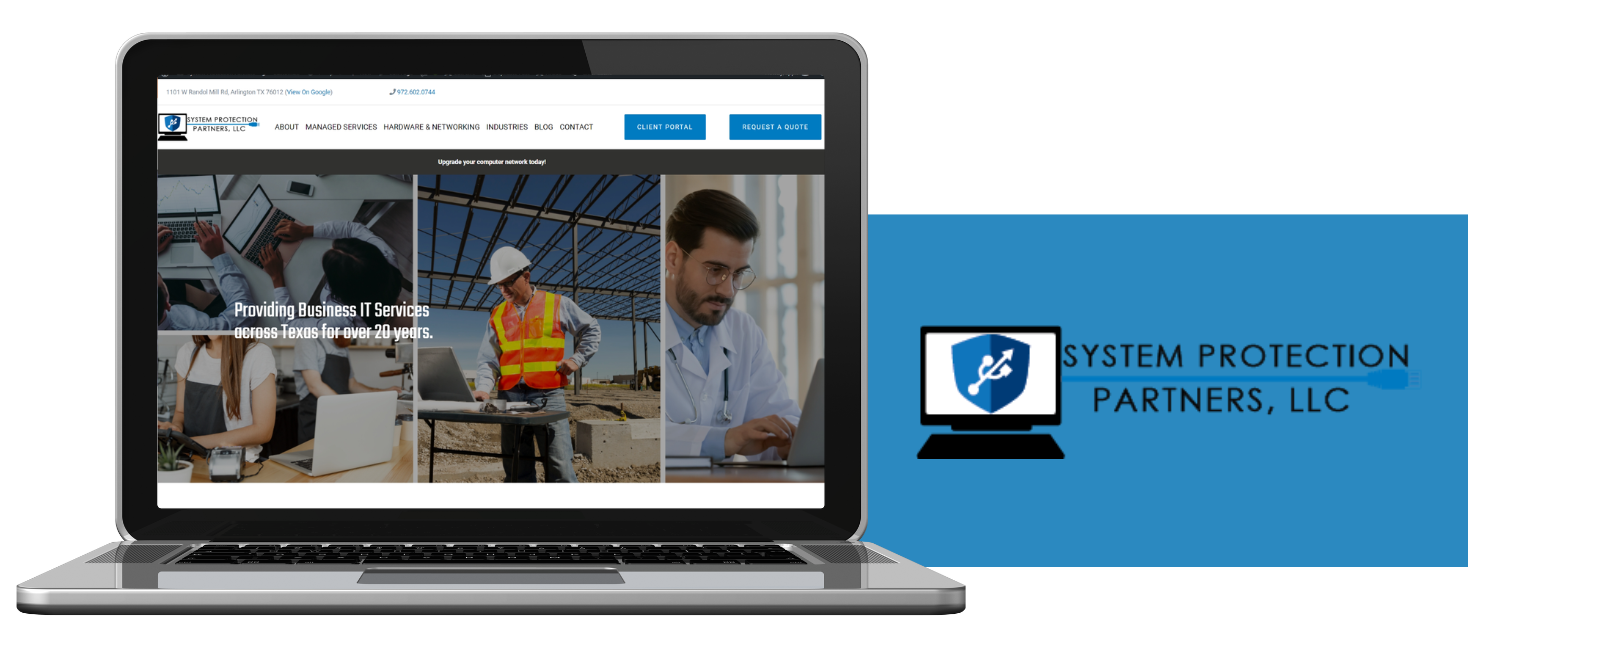 Website & Marketing Client: System Protection Partners